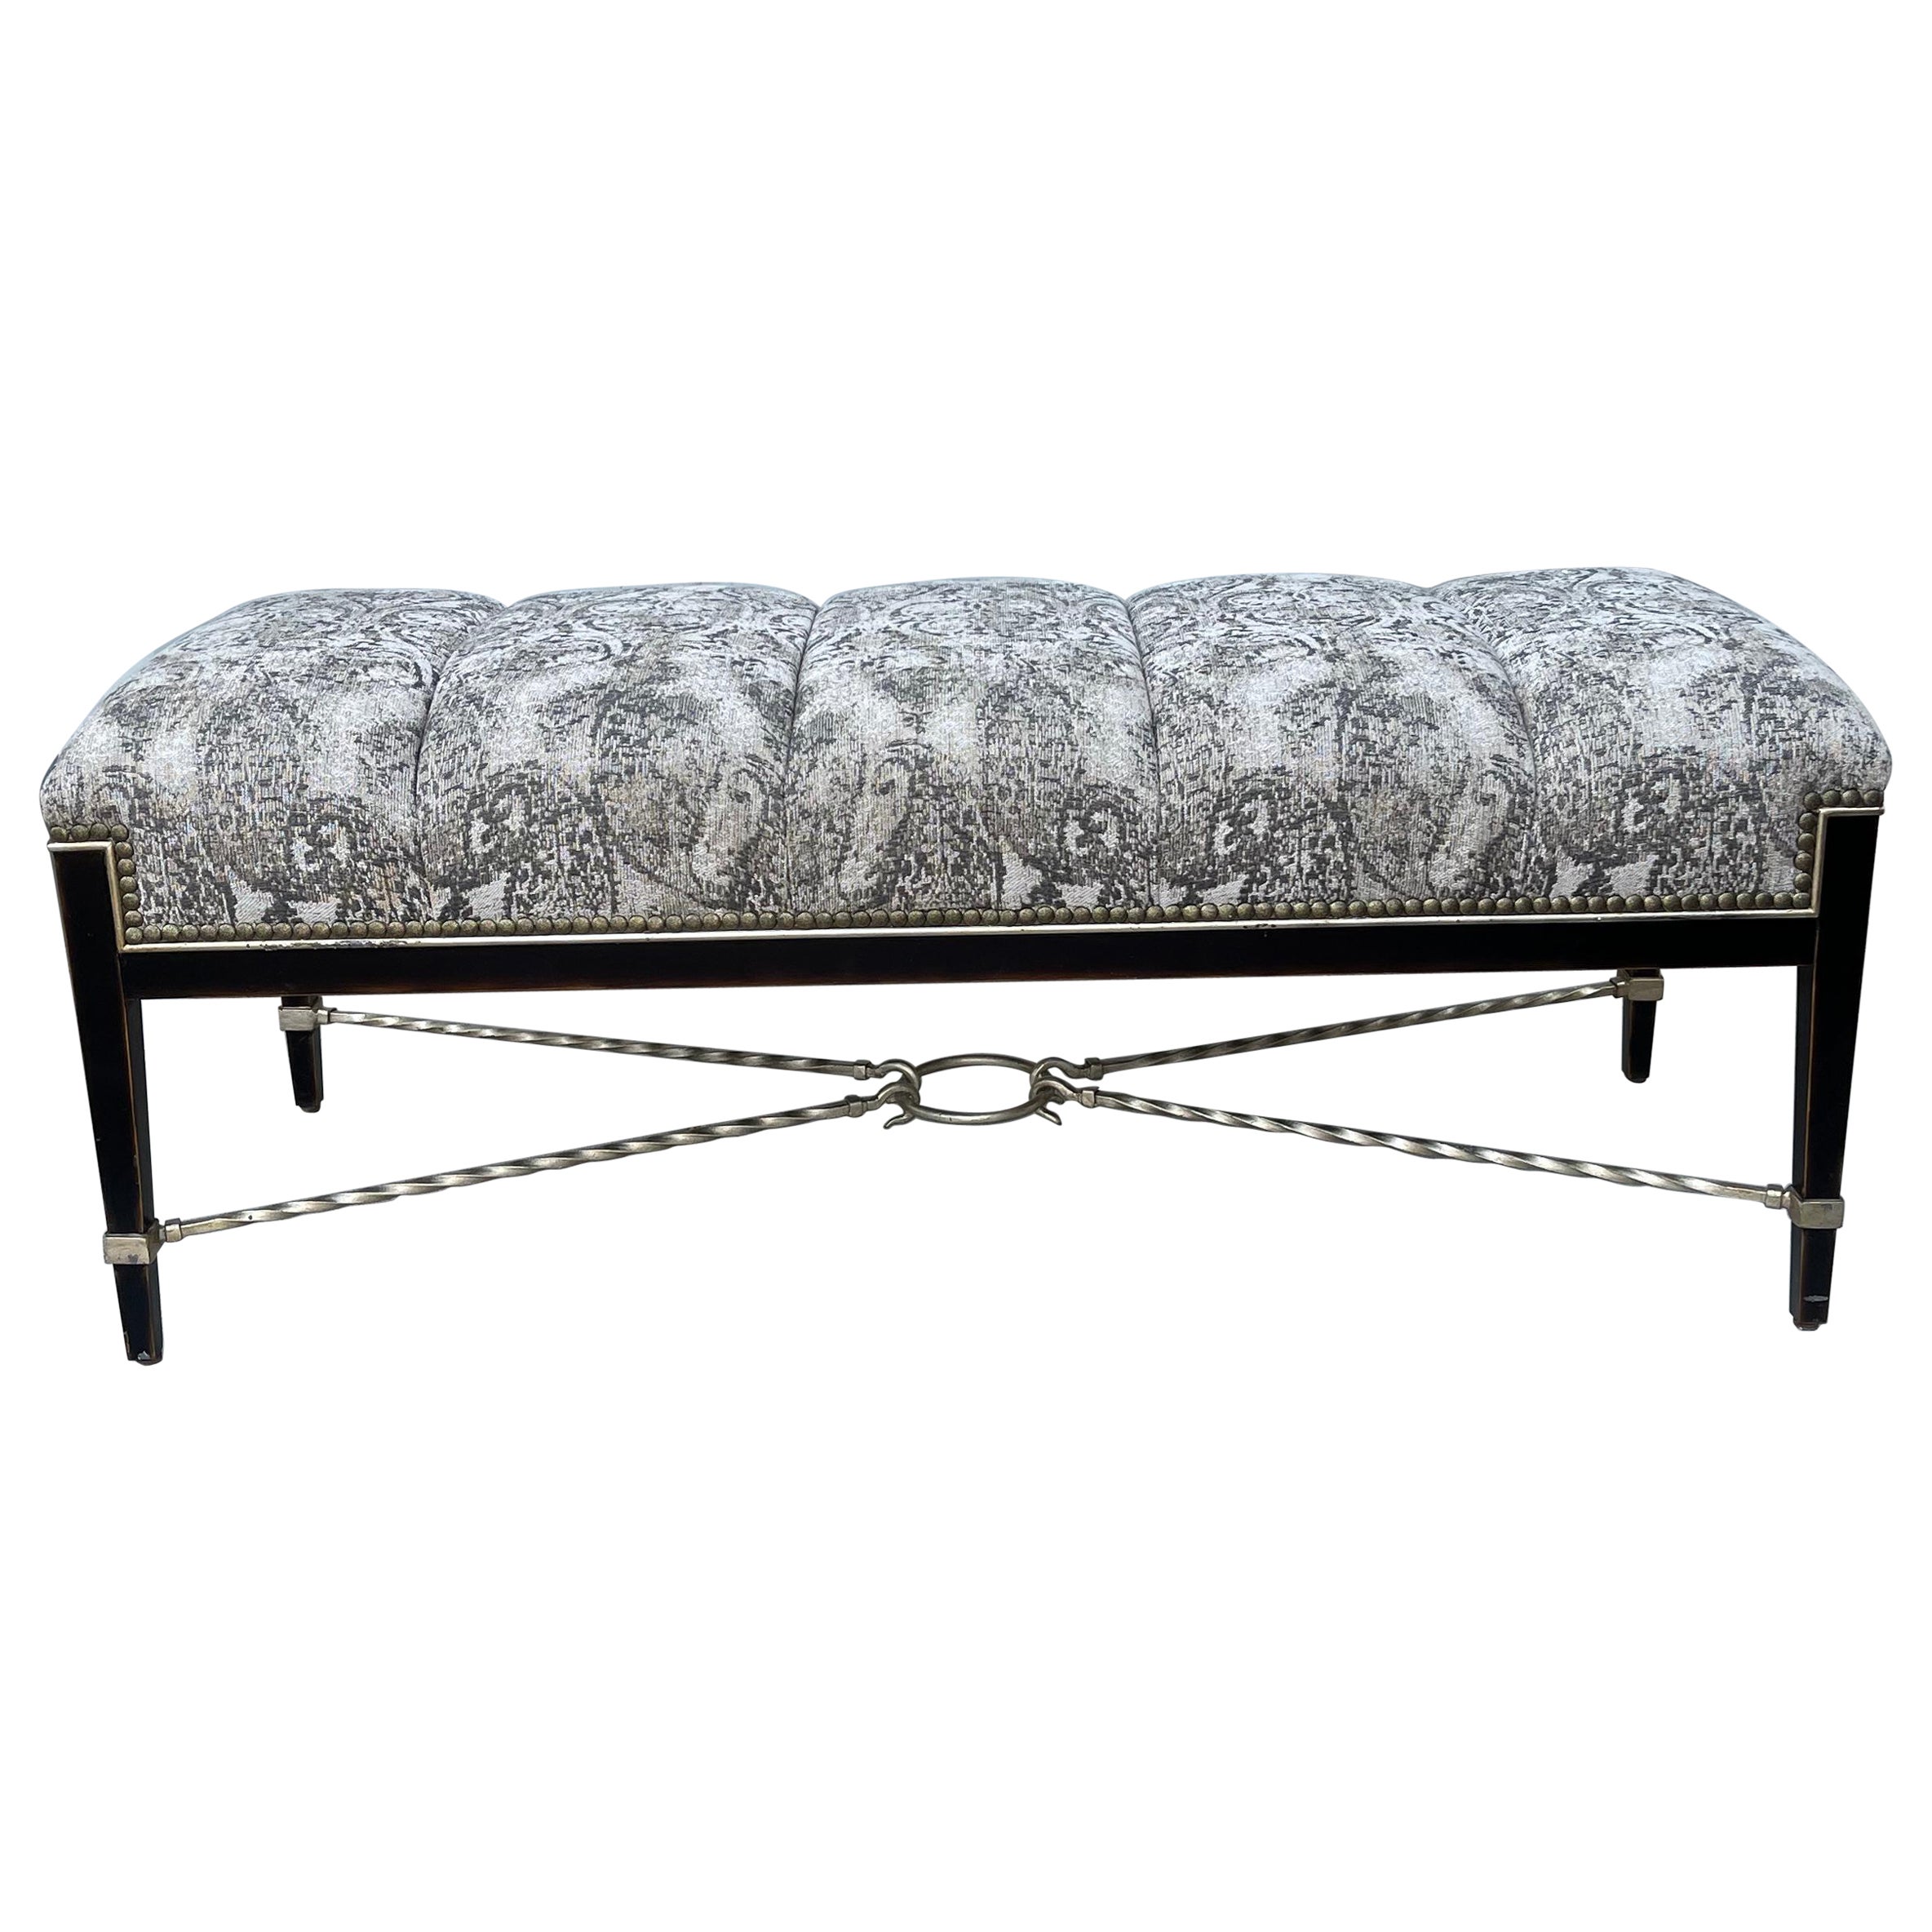 Vintage Marge Carson 'Bolero' Upholstered Benches For Sale